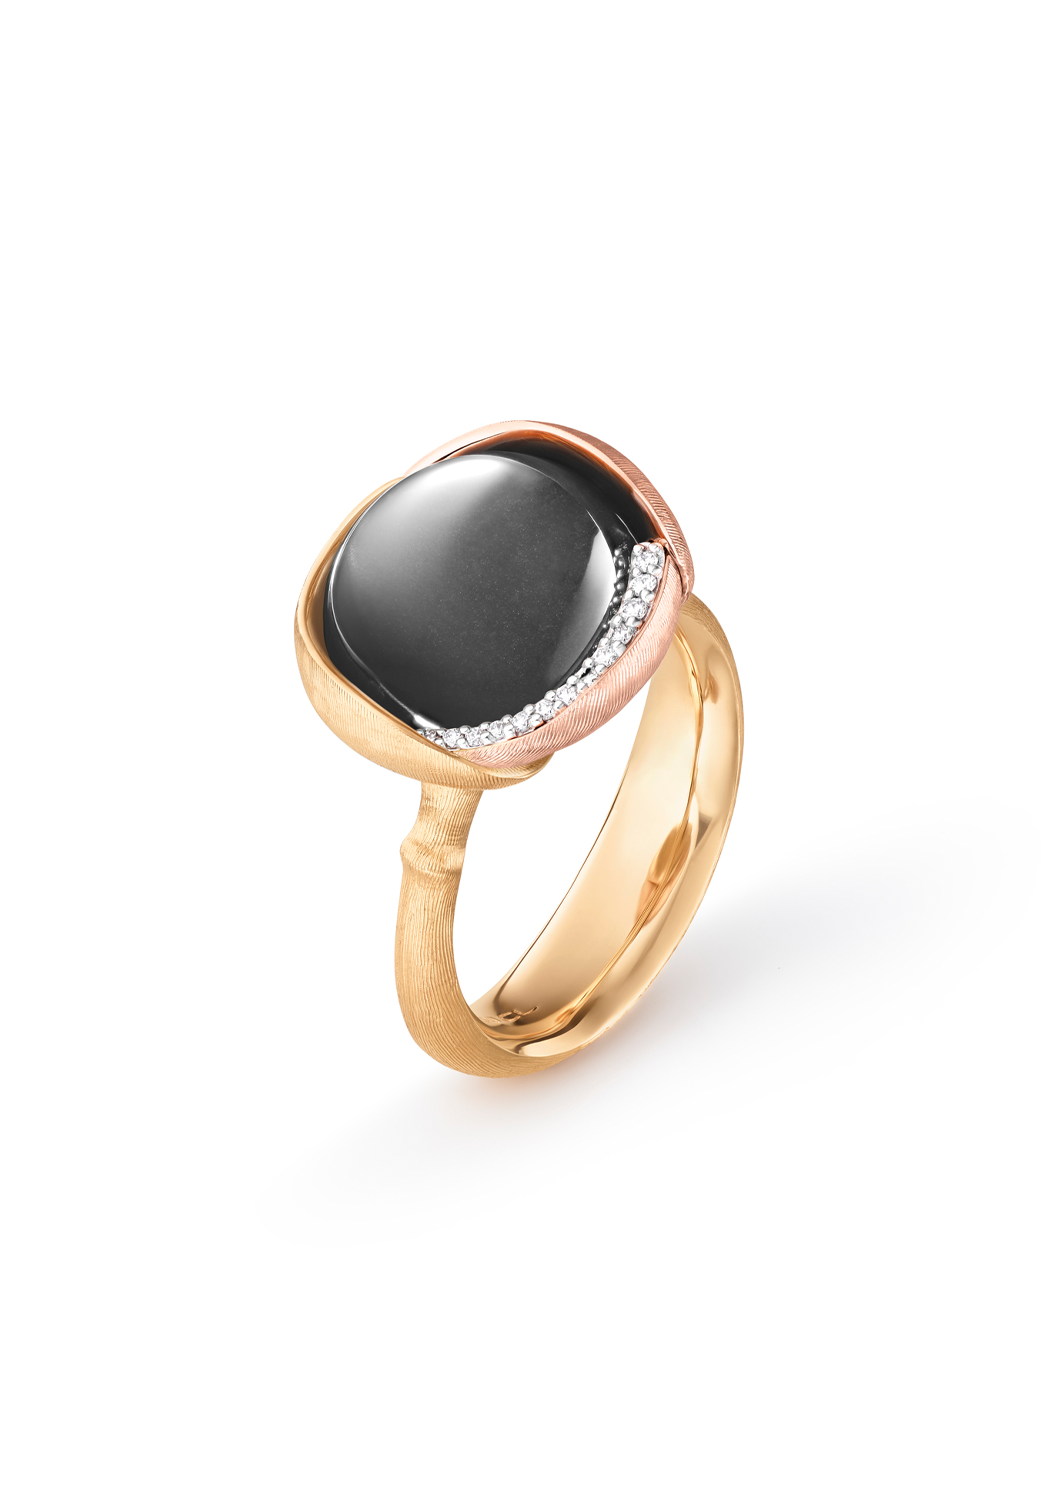 Shield Ring with Black Moonstone - jenny reeves